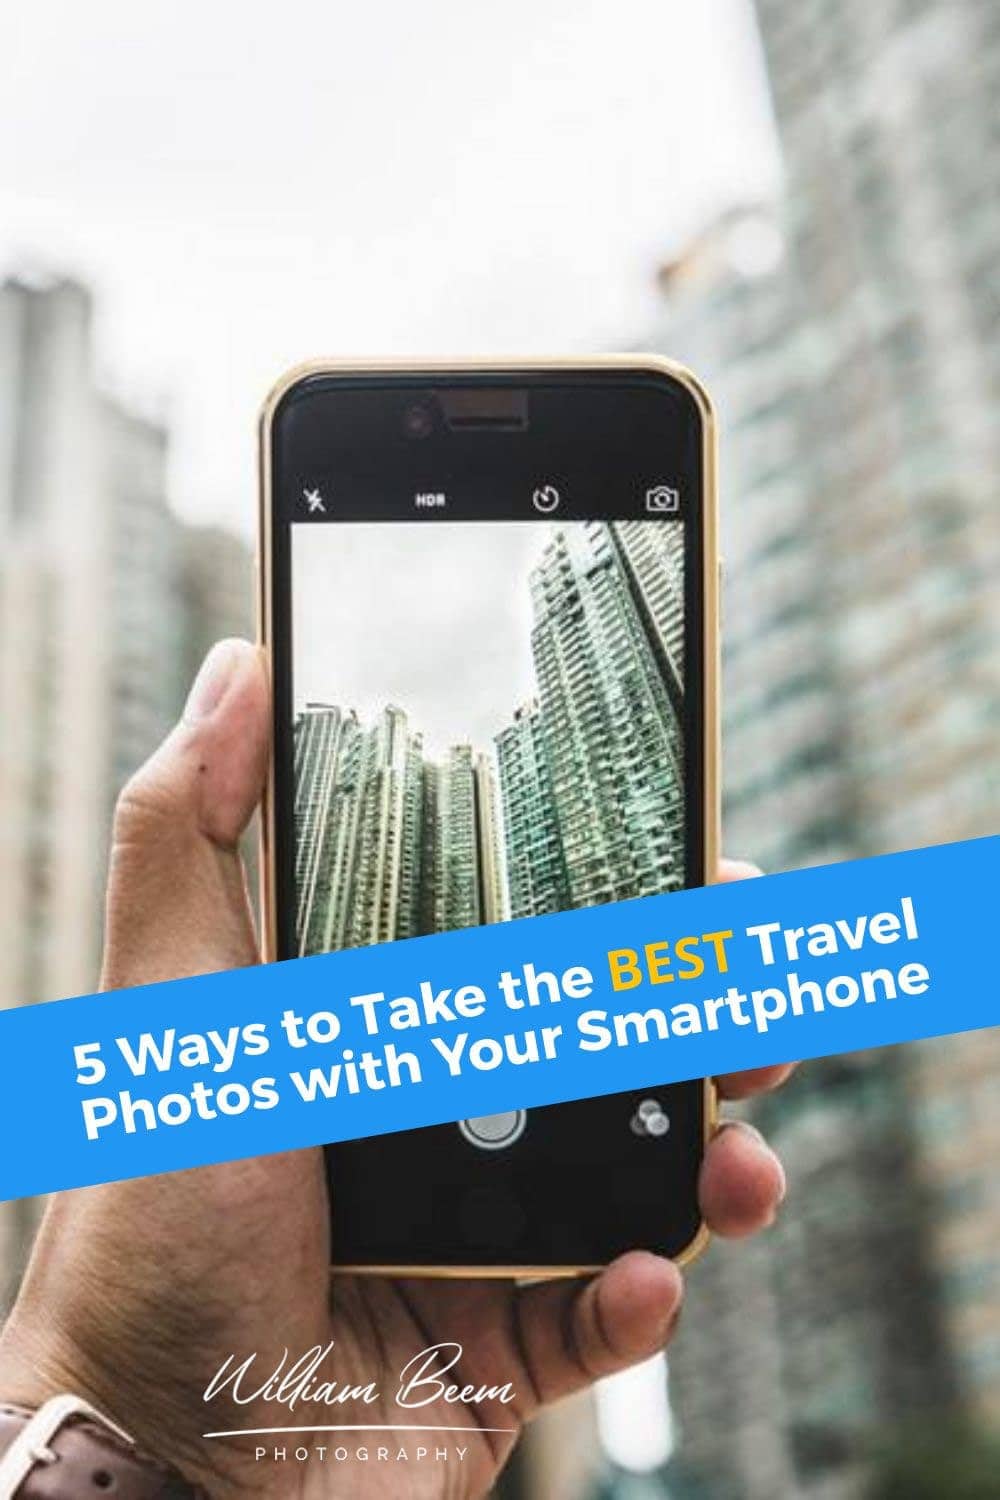 5 Ways to Take the BEST Travel Photos with Smart Phones